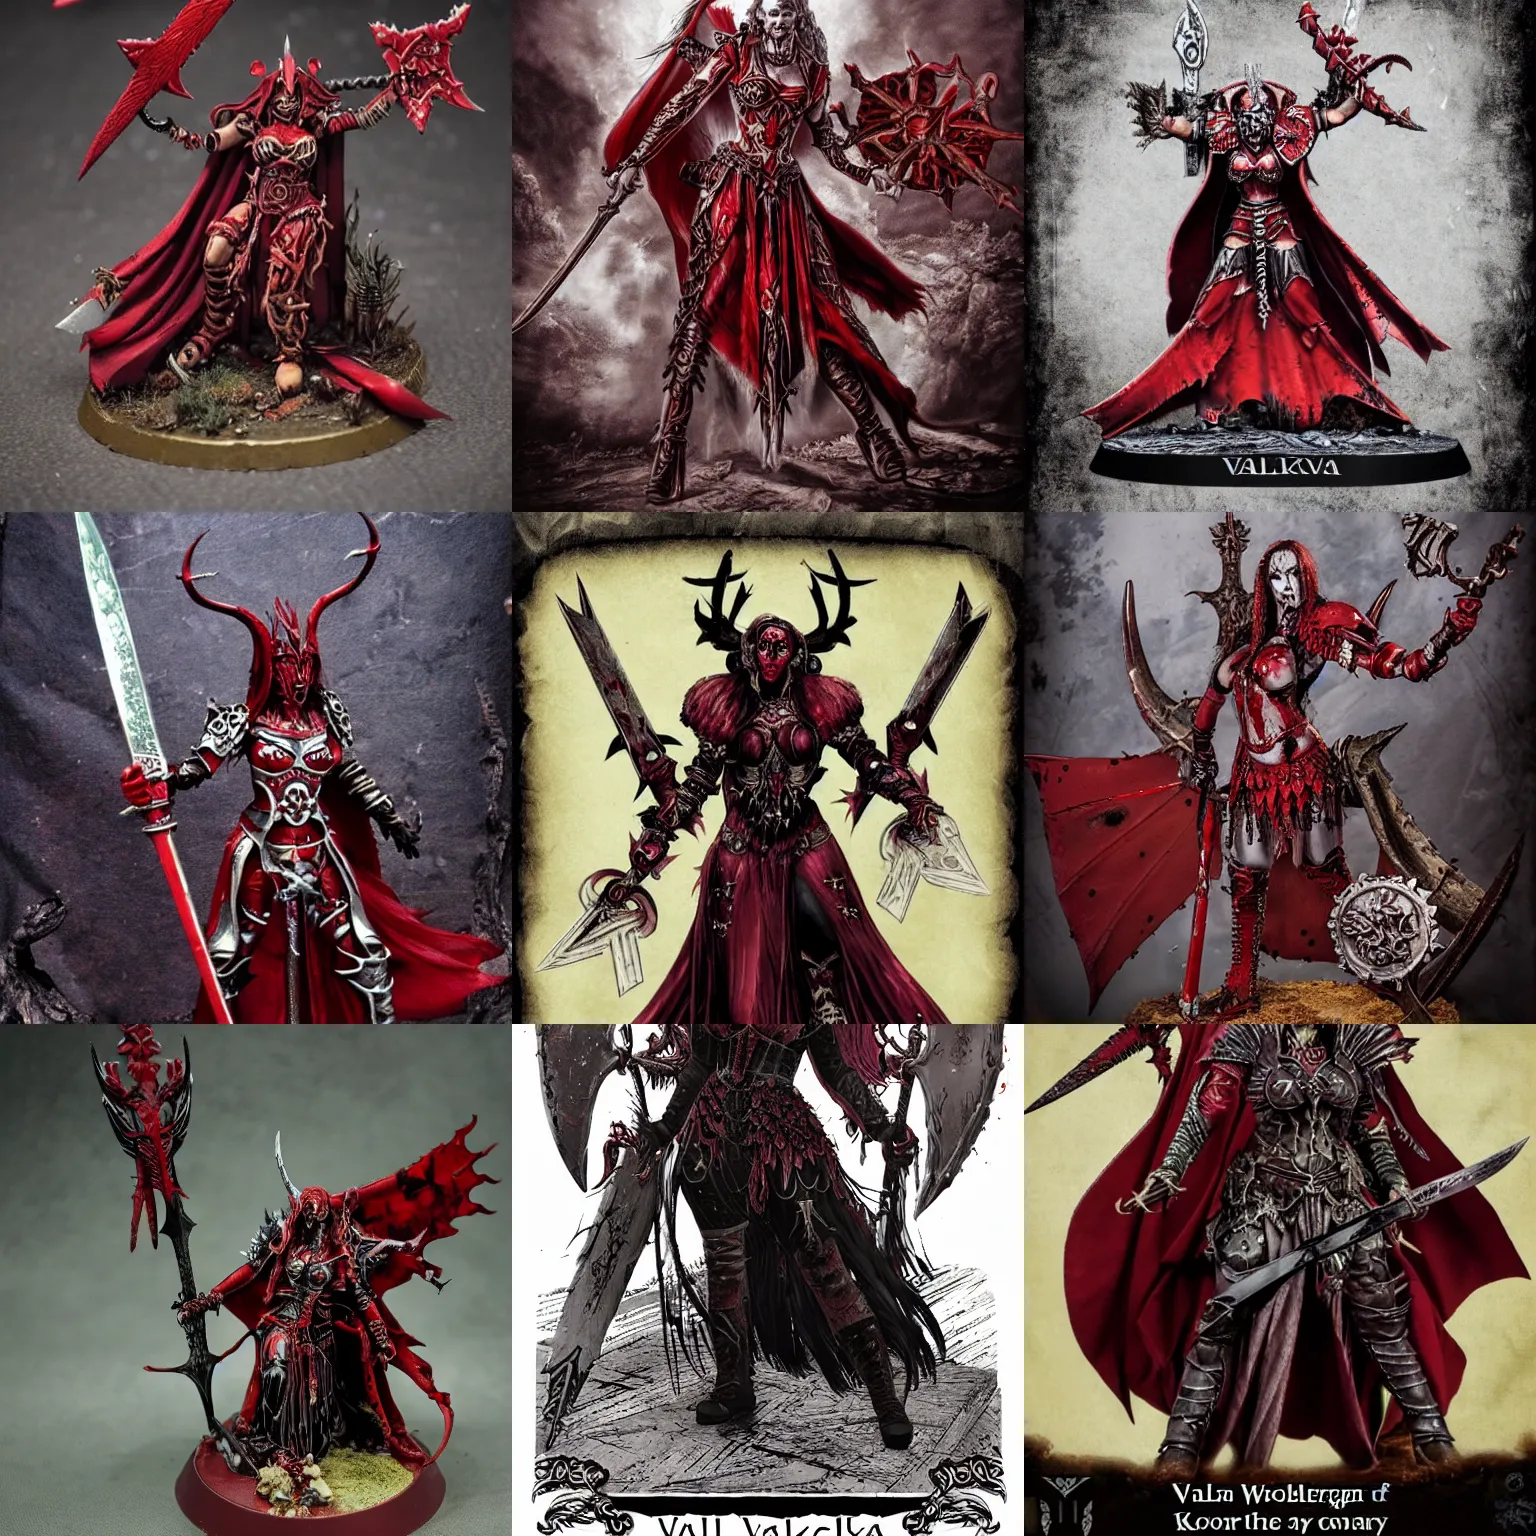 Prompt: Valkia the Bloody, the Gorequeen, the Valkyrie, the Bringer of Glory, the Sword-Maiden of the Blood God and the Dread-Consort of Khorne